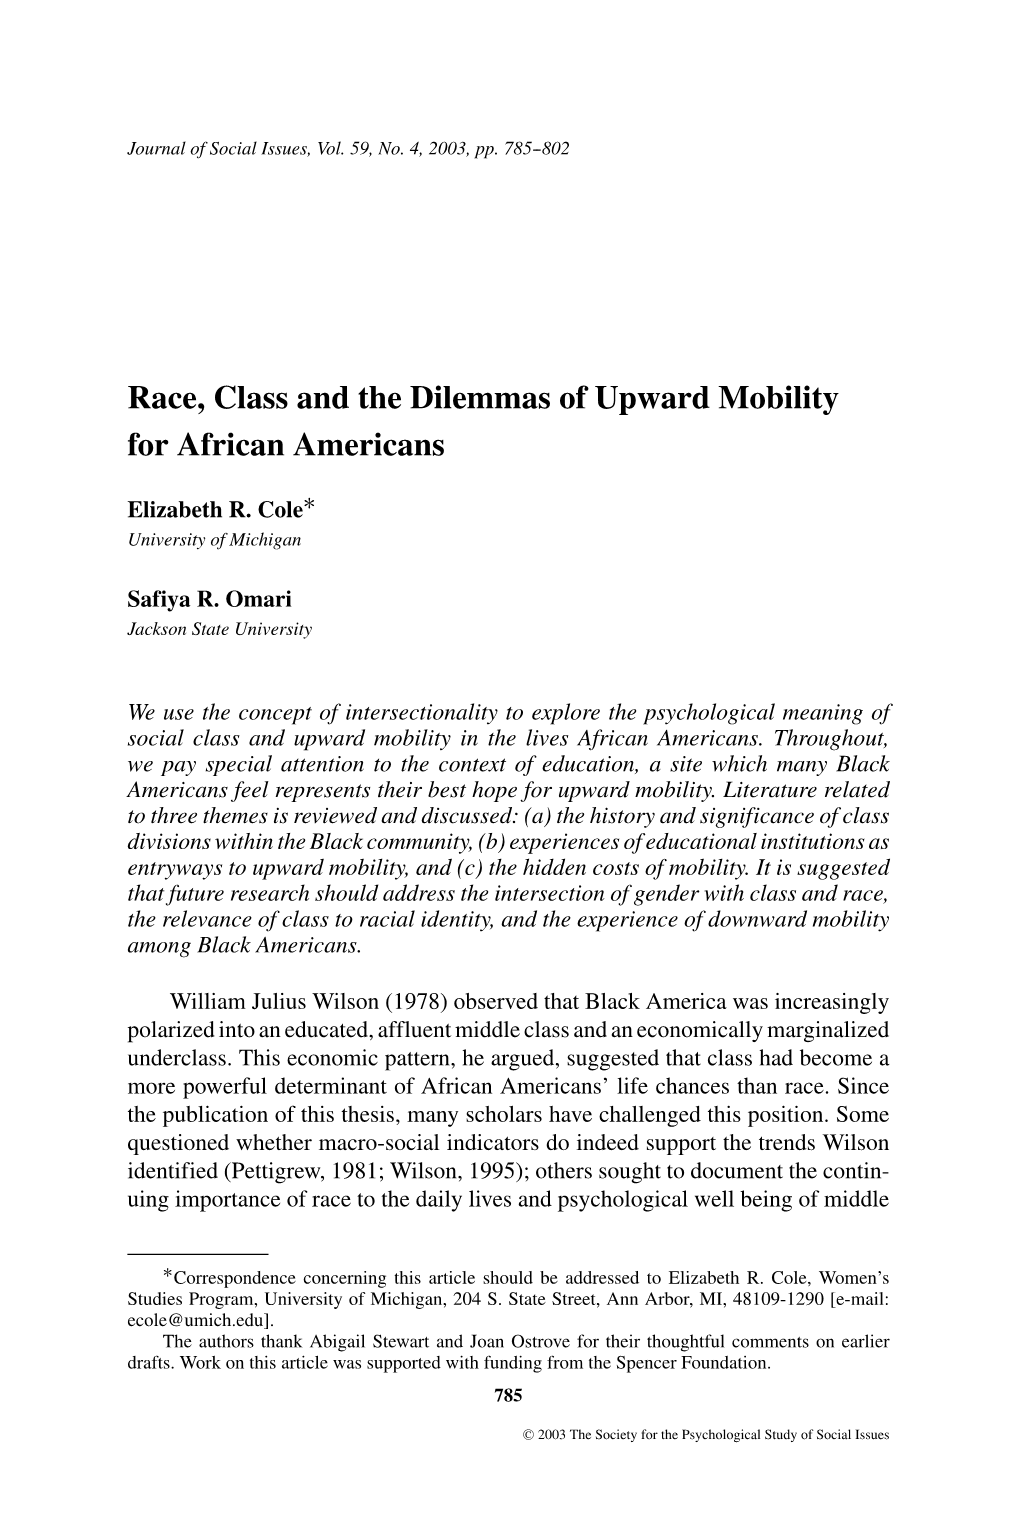 Race, Class and the Dilemmas of Upward Mobility for African Americans ∗ Elizabeth R